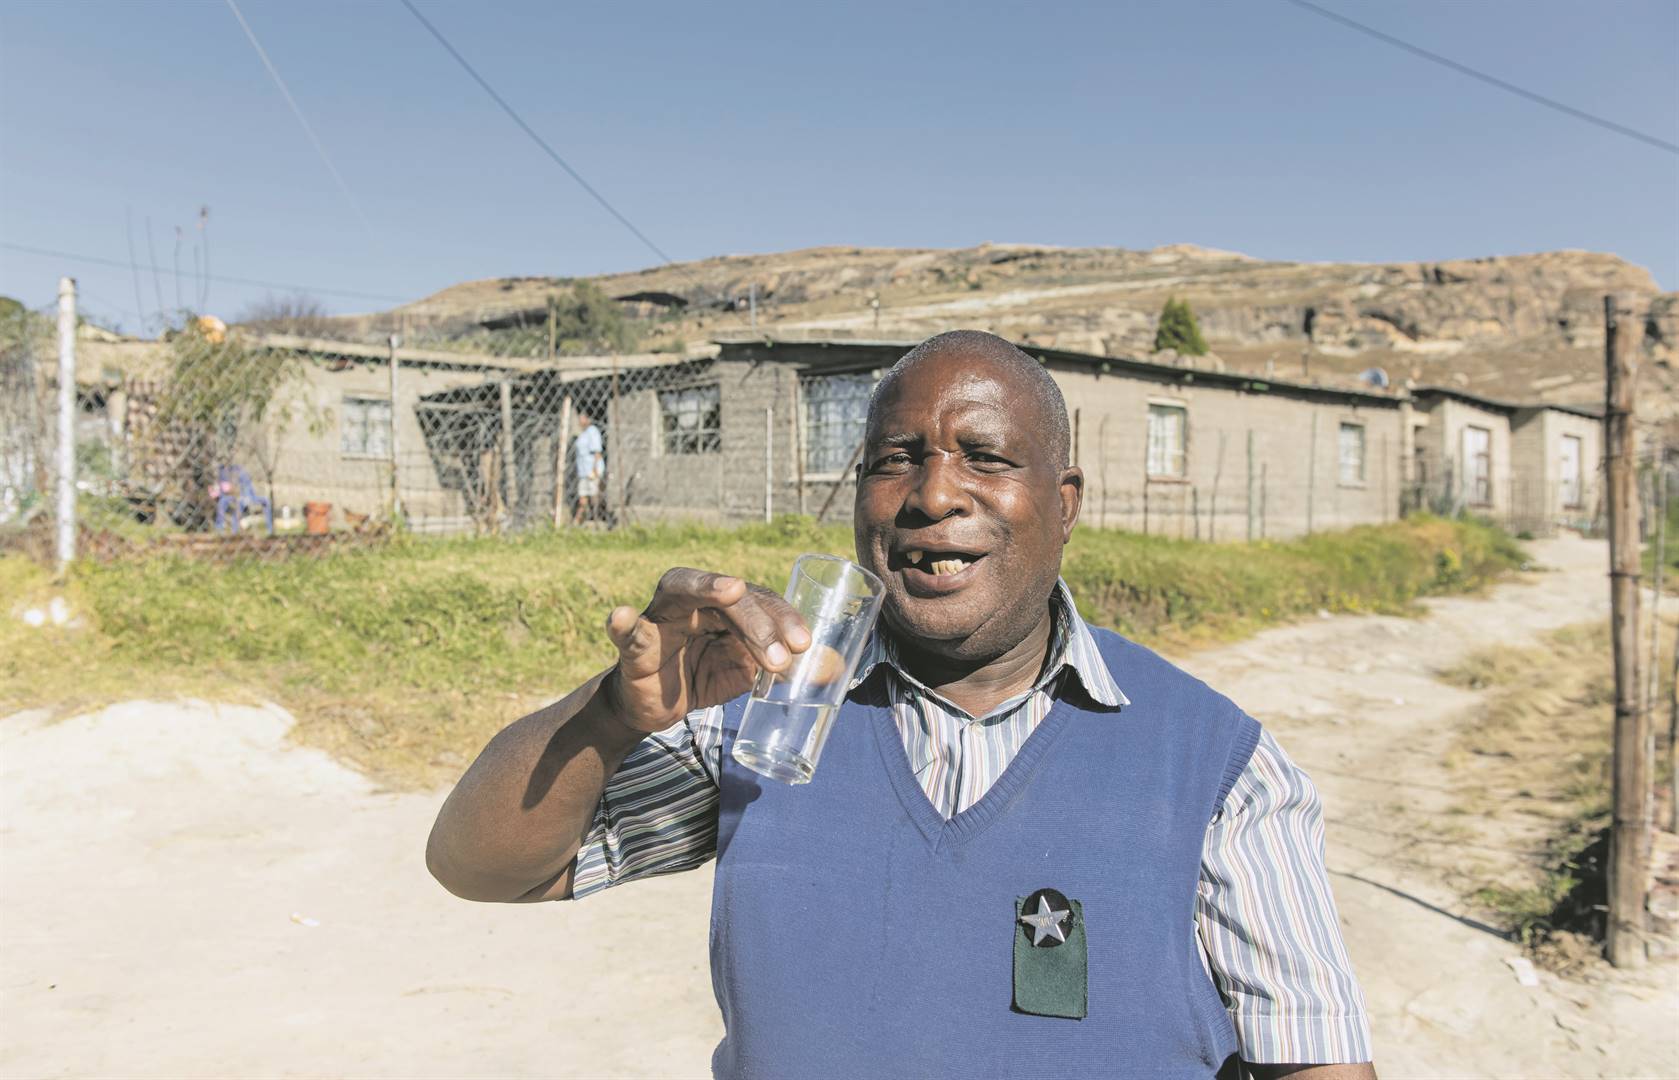 Elias Mpholo is happy to have running water in his area after years of struggle. Photo: Deon Raath